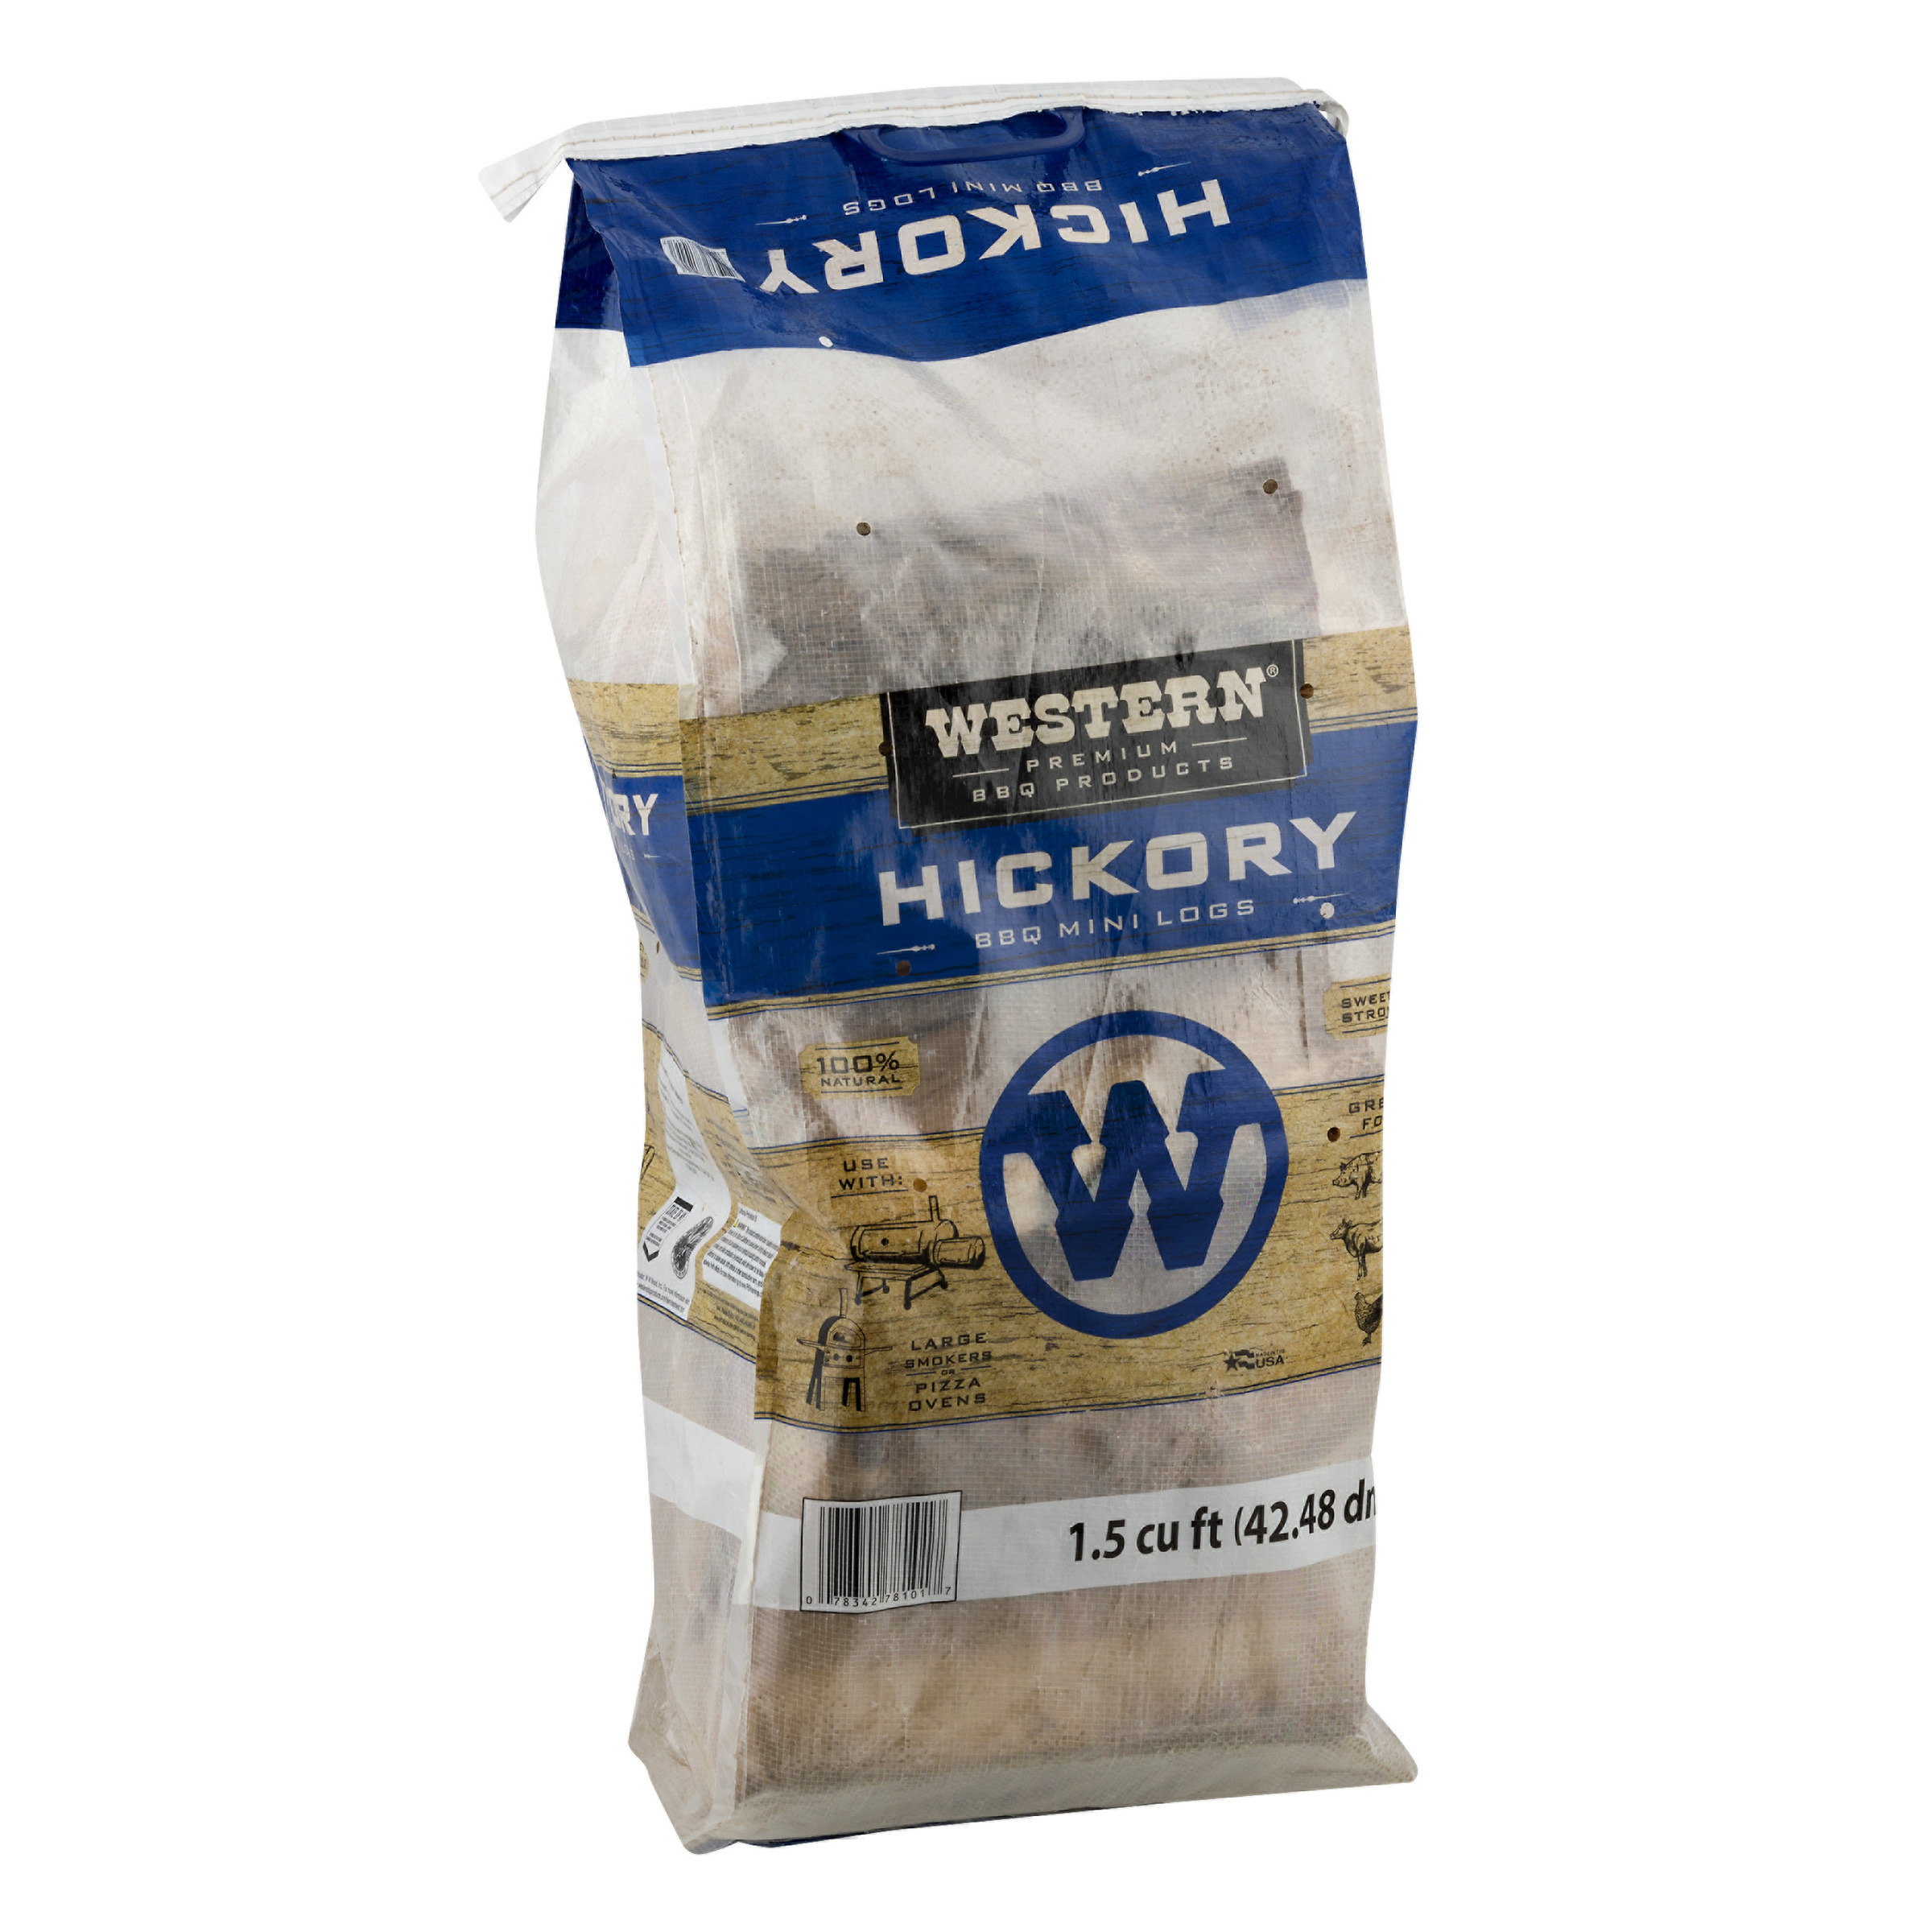 Western Premium BBQ Products 1.5 cu ft Hickory BBQ Smoking Mini Logs - image 2 of 8